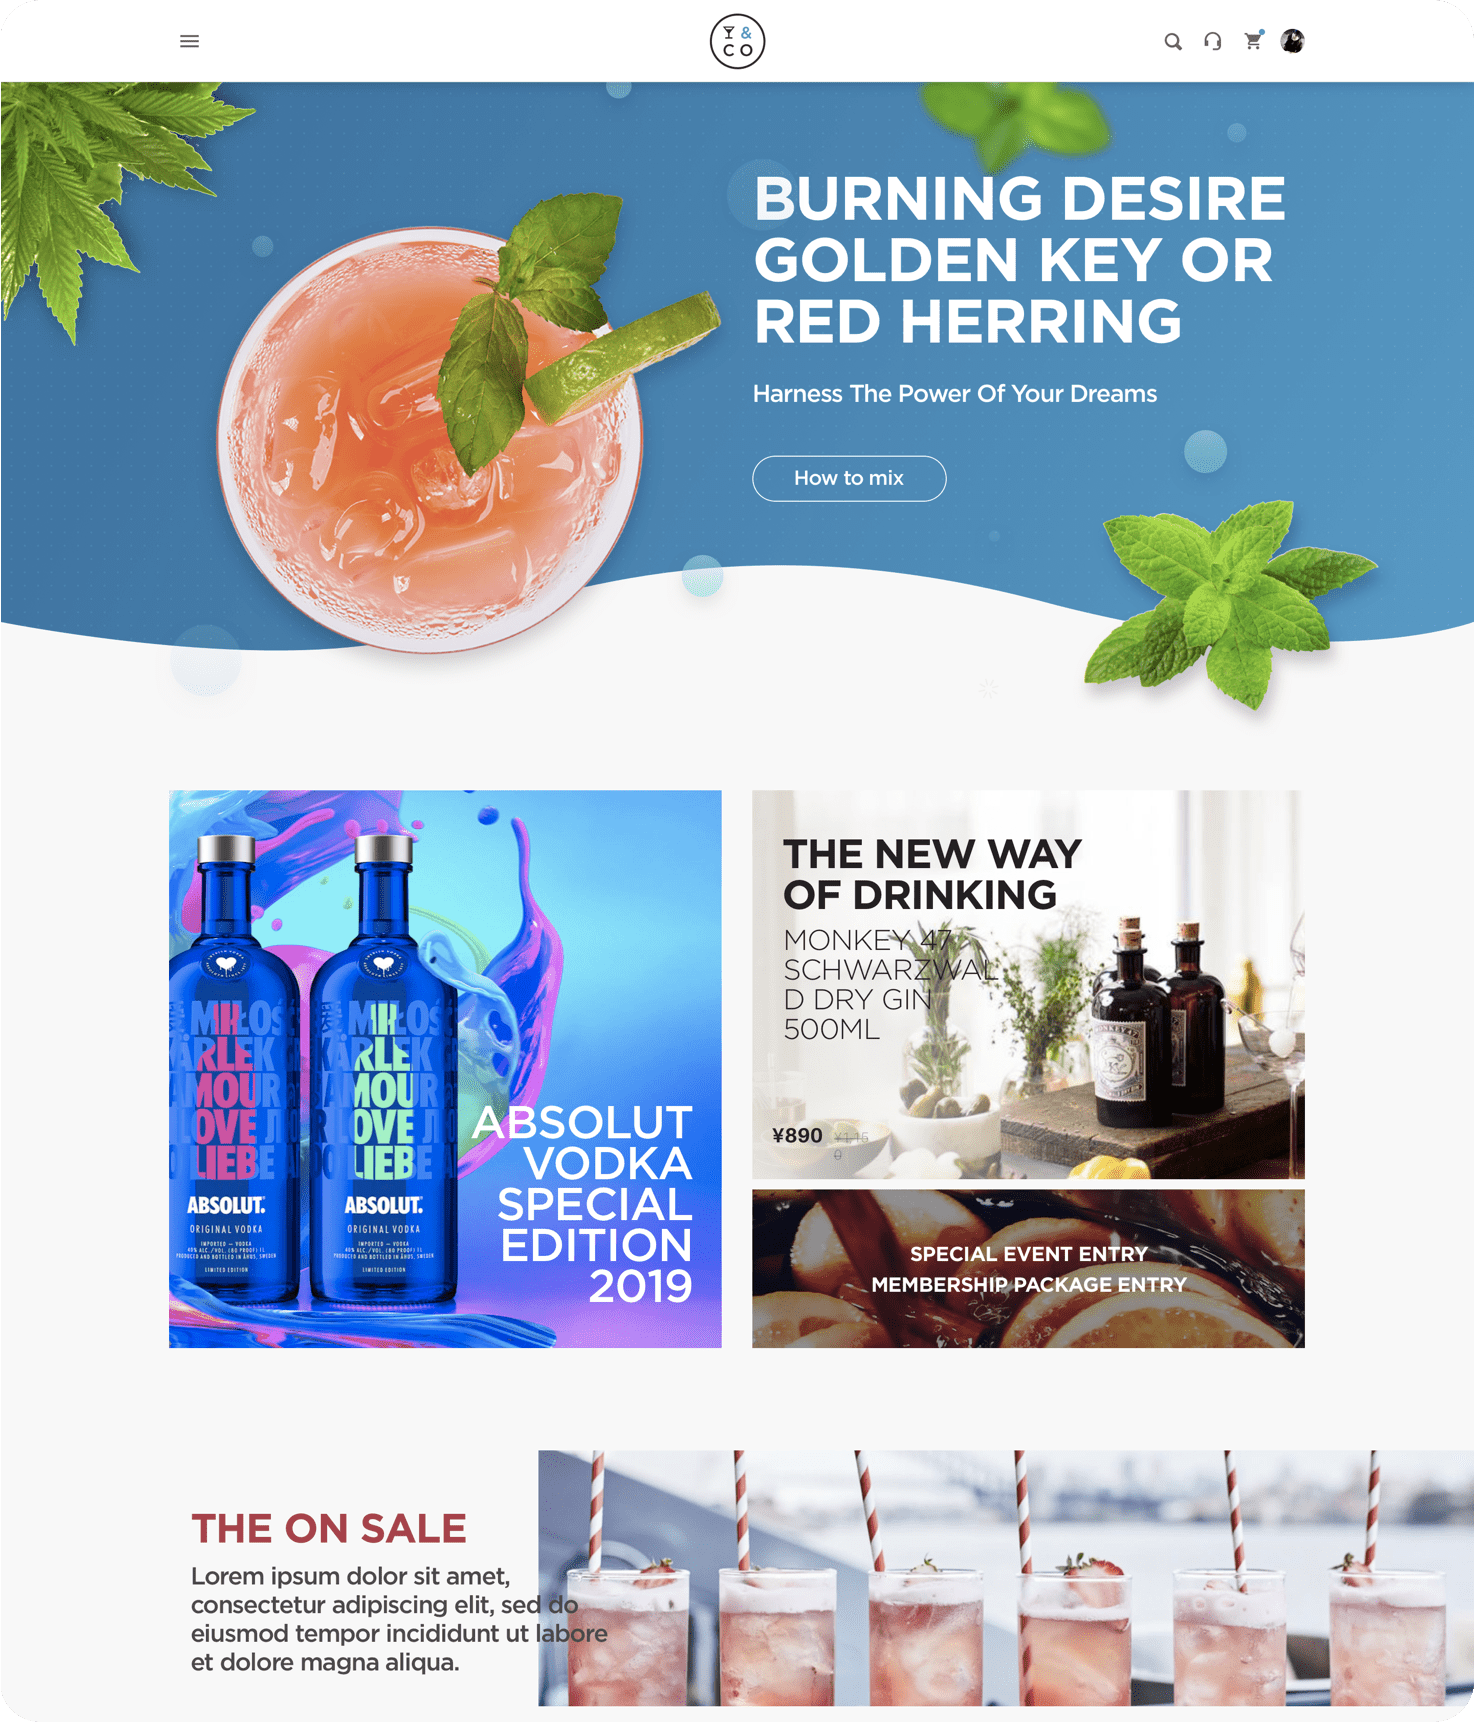 The Drinks&Co website that ITC built matched the Chinese consumers and aesthetic preferences